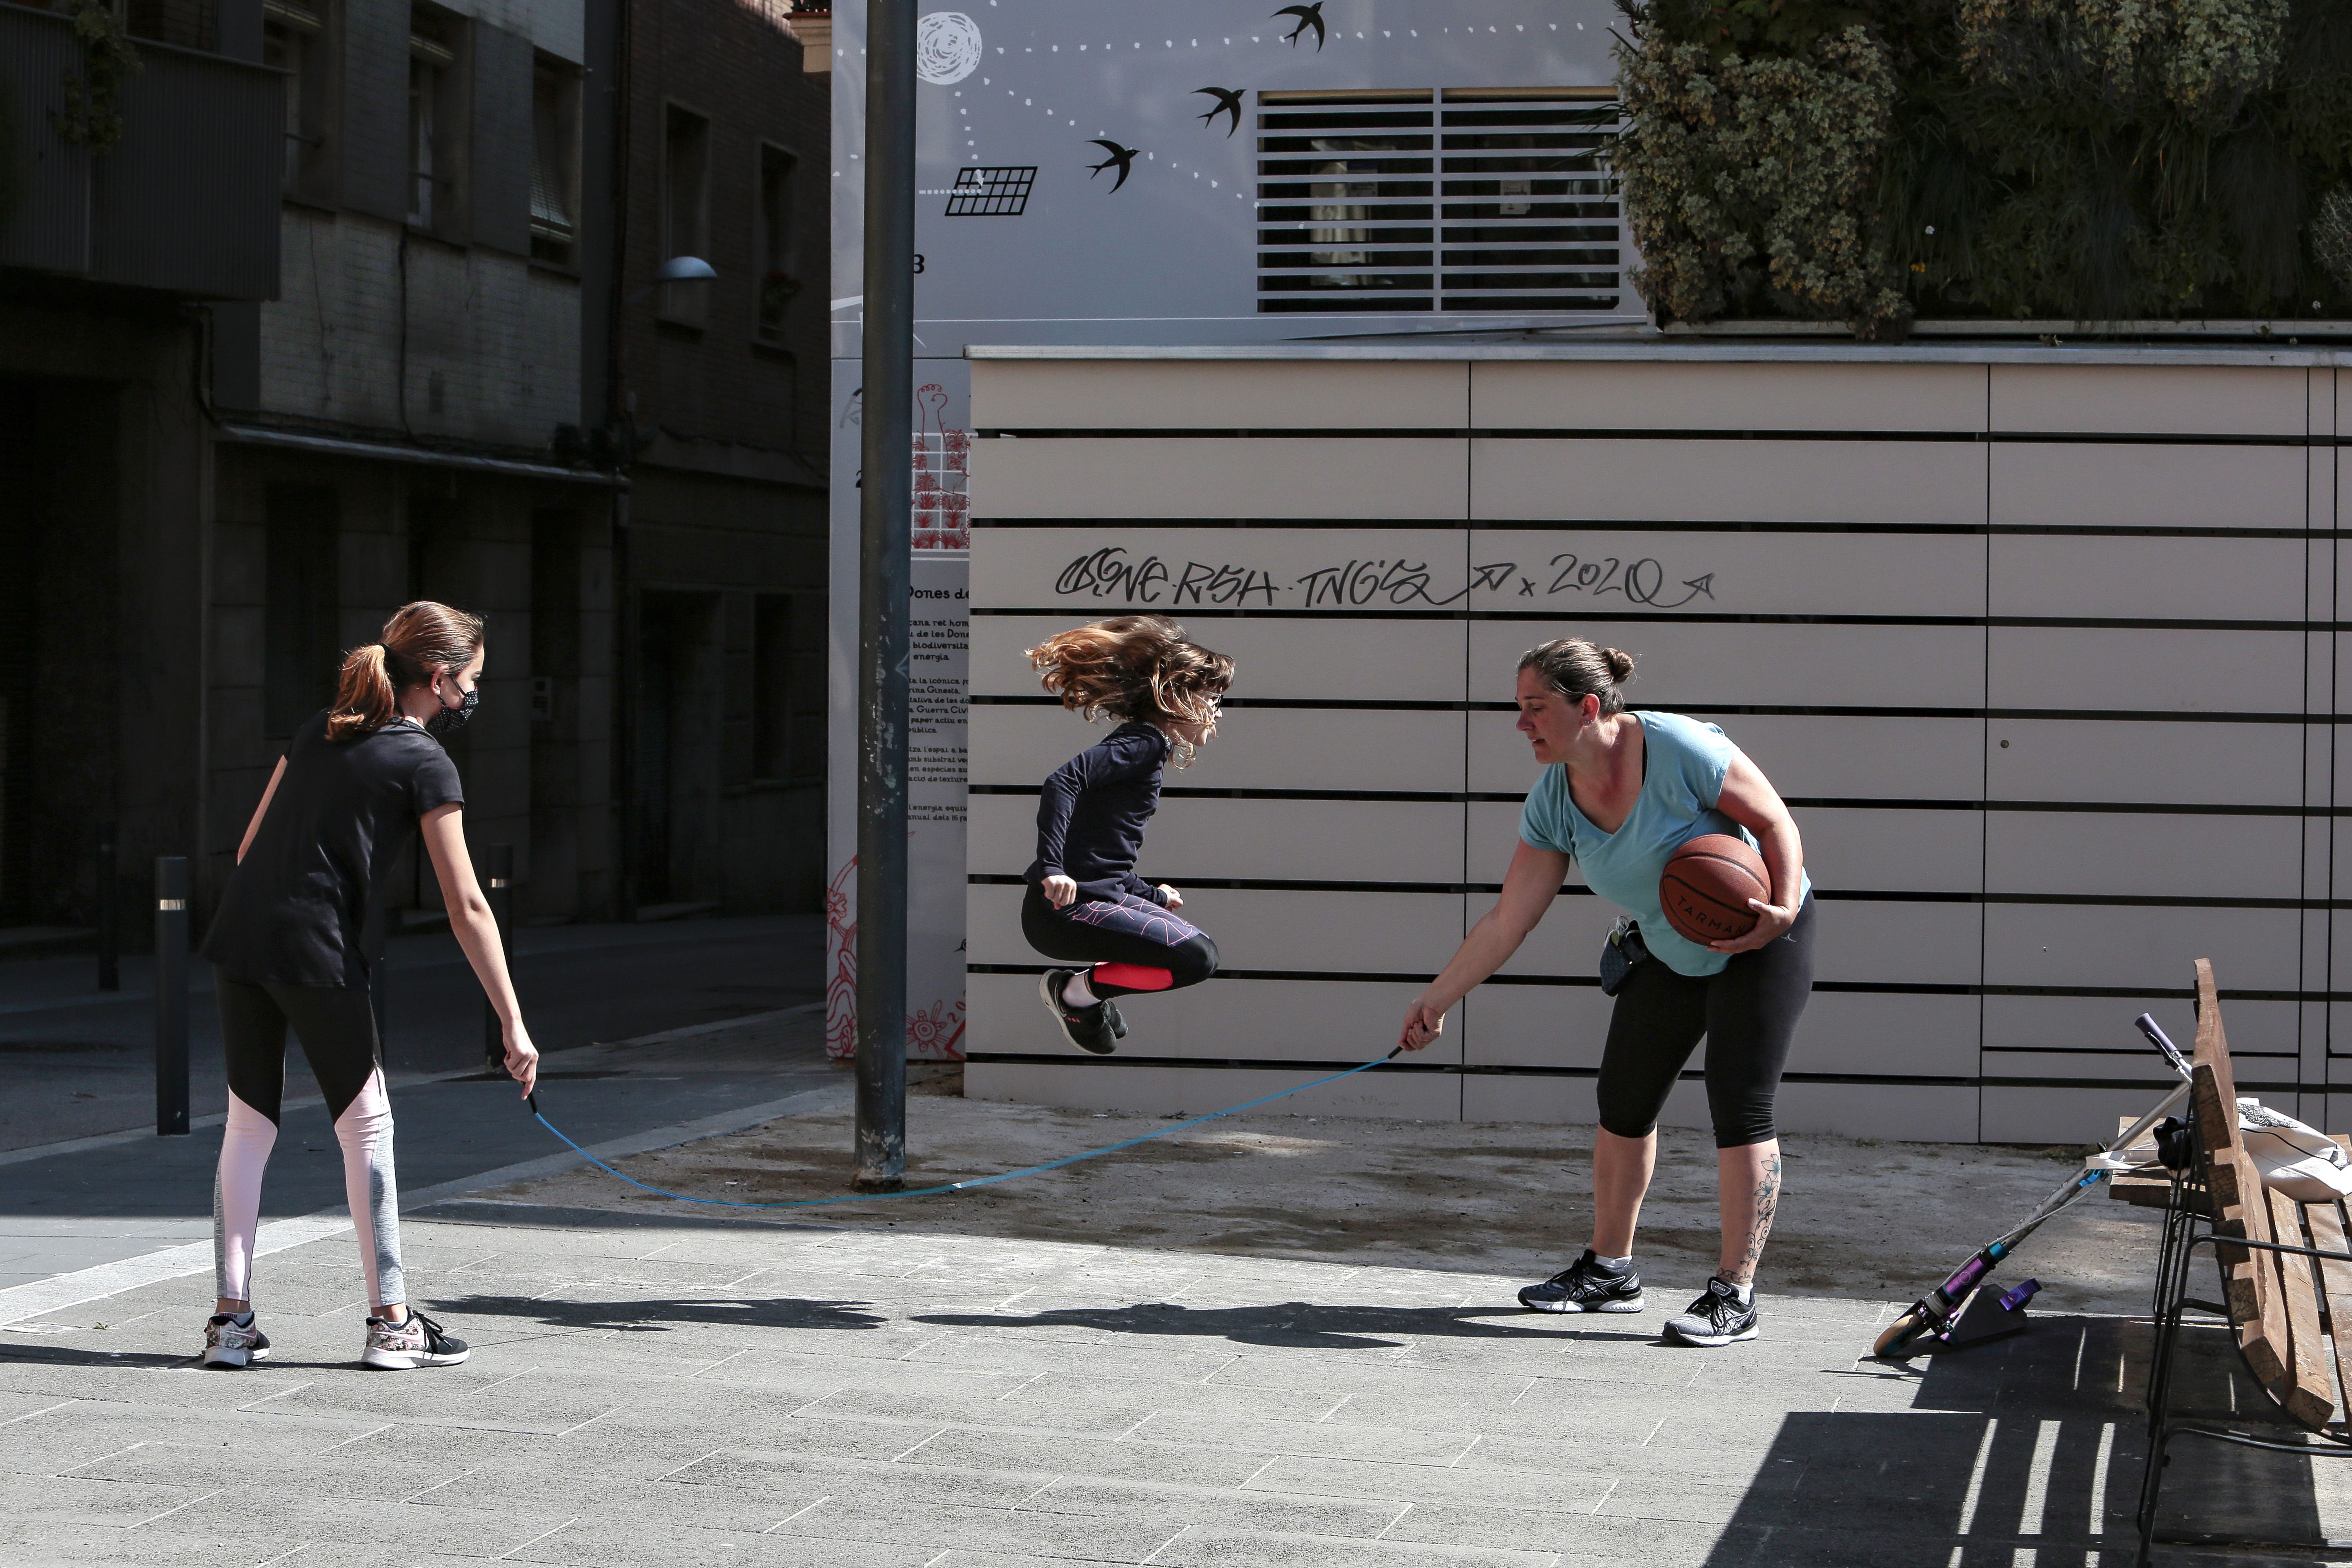 In this image, a girl jumps rope that is held by two women on a sidewalk